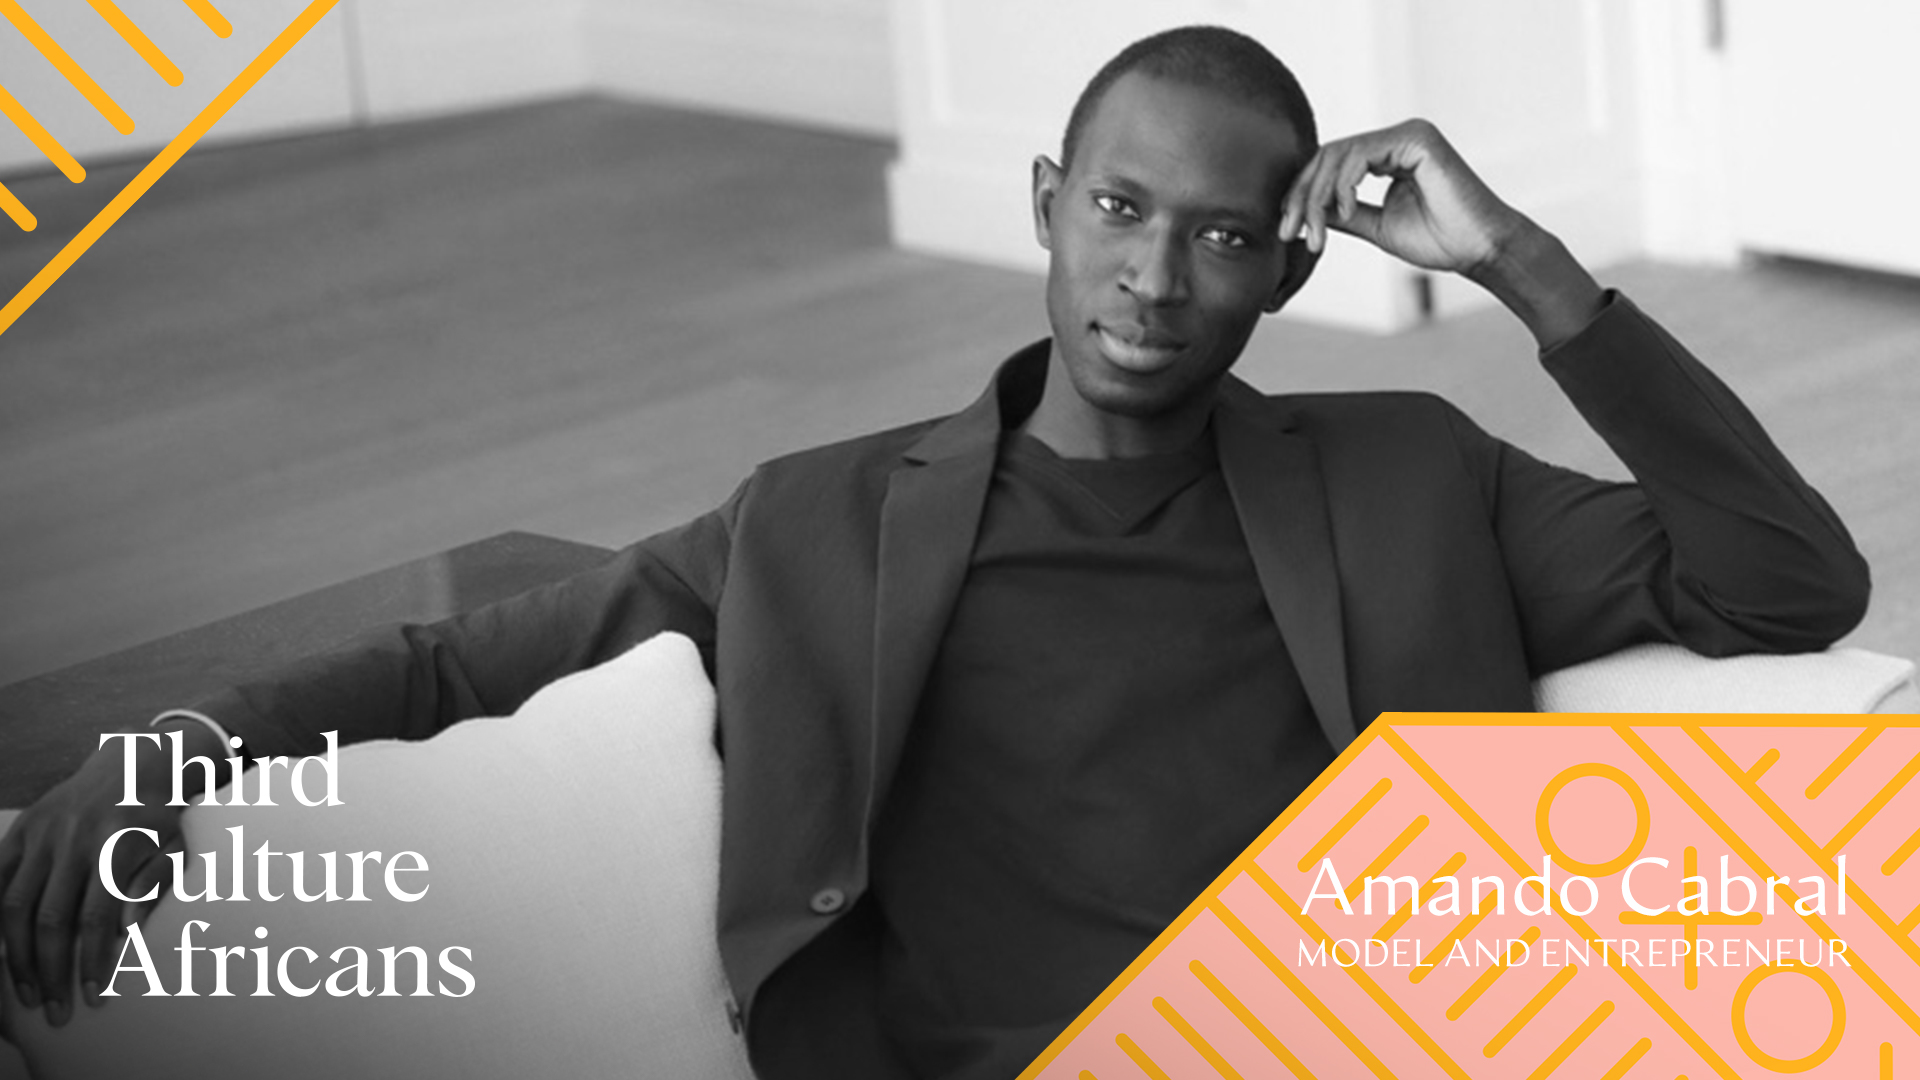 Armando Cabral, Representing Black African Men on the Runway and the Business World